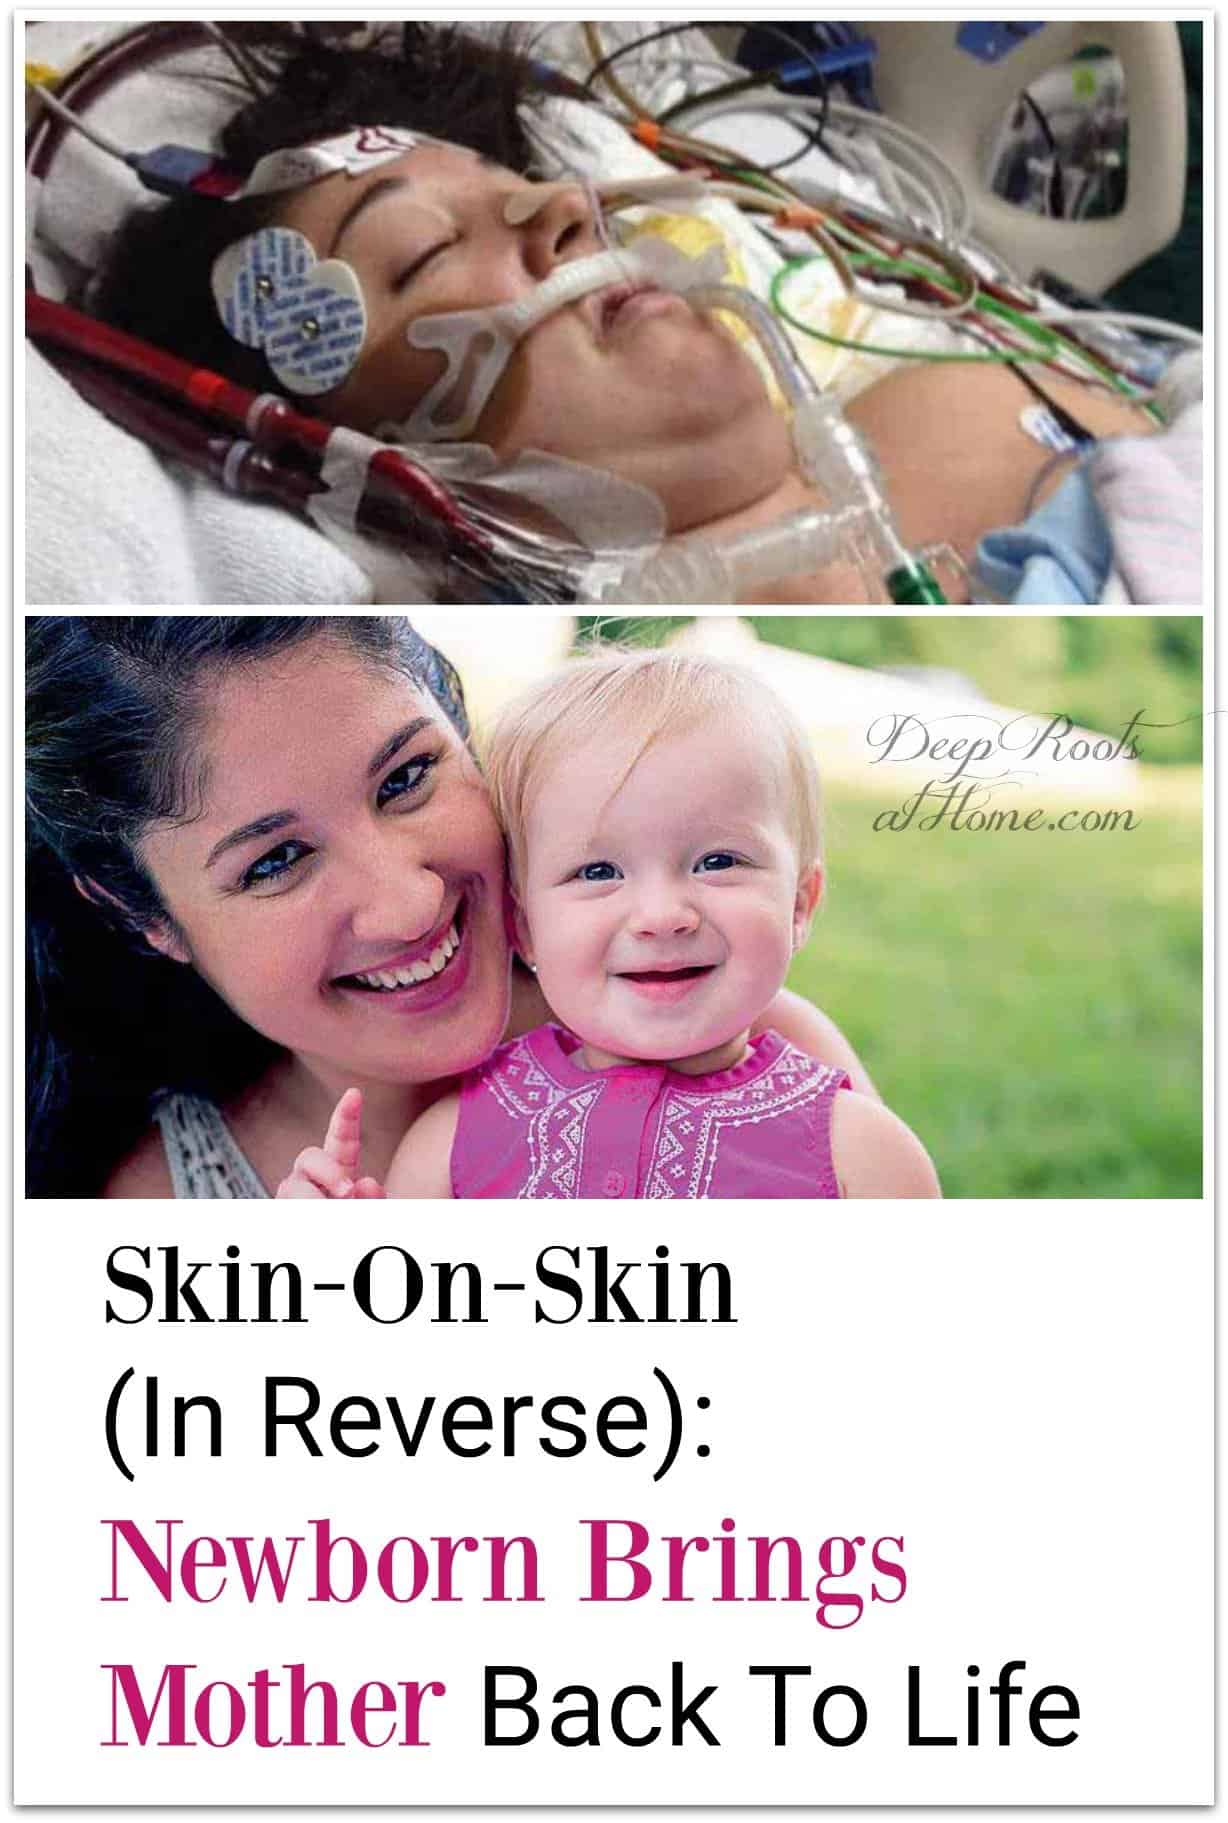 Skin-On-Skin In Reverse: Newborn Brings Mother Back To Life. comatose mother Pinterest image